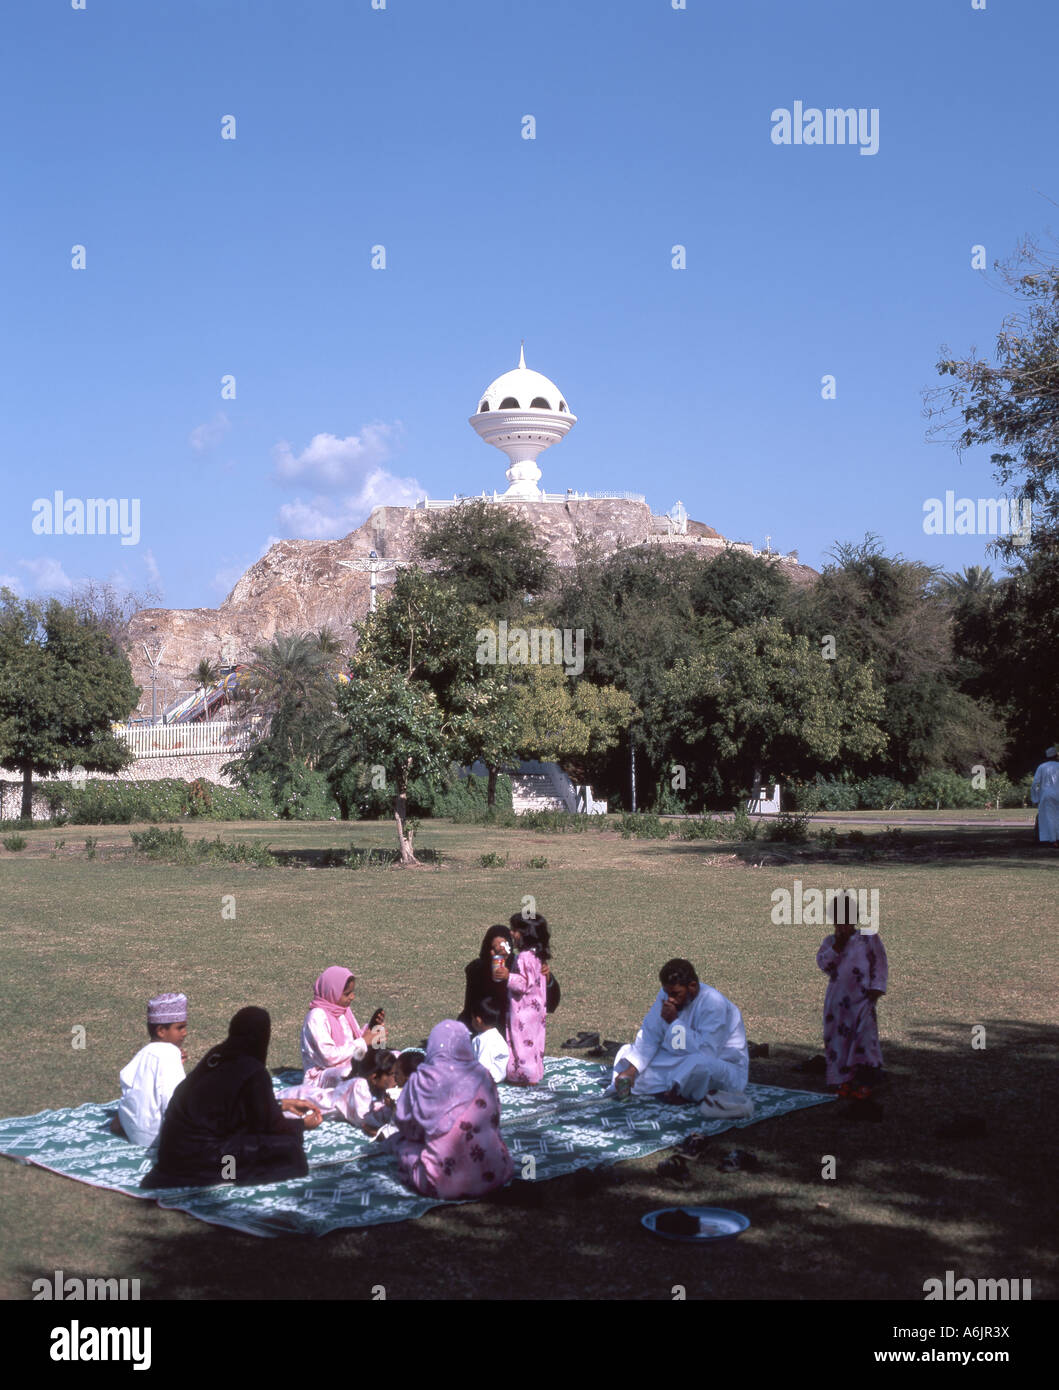 Family picnic in park and 'Incense Burner' Monument, Riyam City, Muscat, Masqat Governorate, Sultanate of Oman Stock Photo